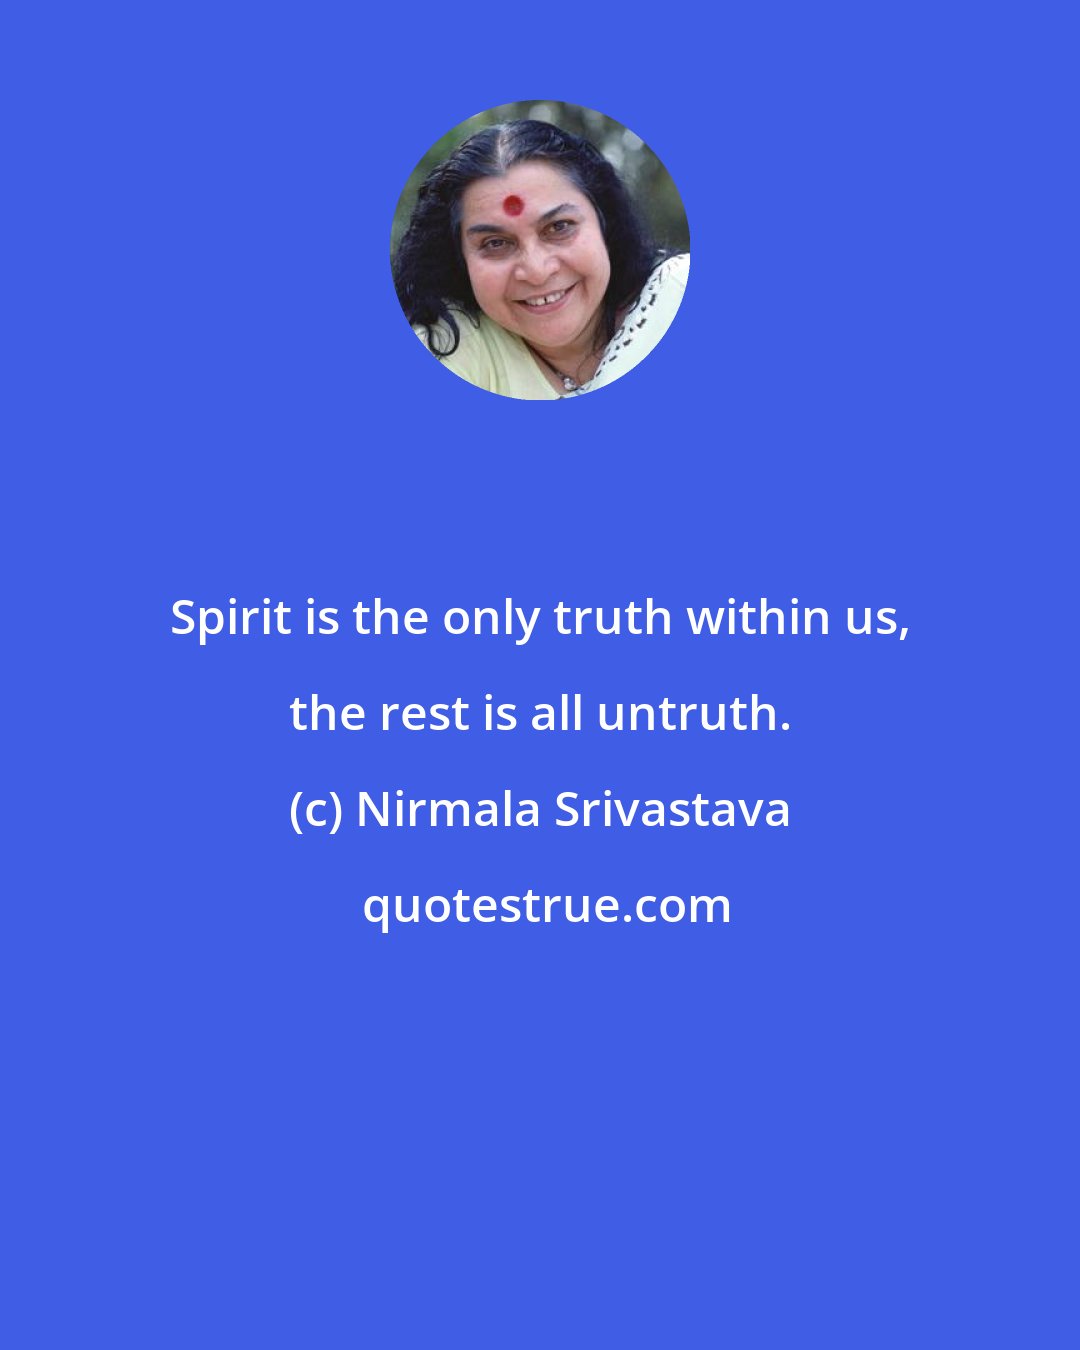 Nirmala Srivastava: Spirit is the only truth within us, the rest is all untruth.